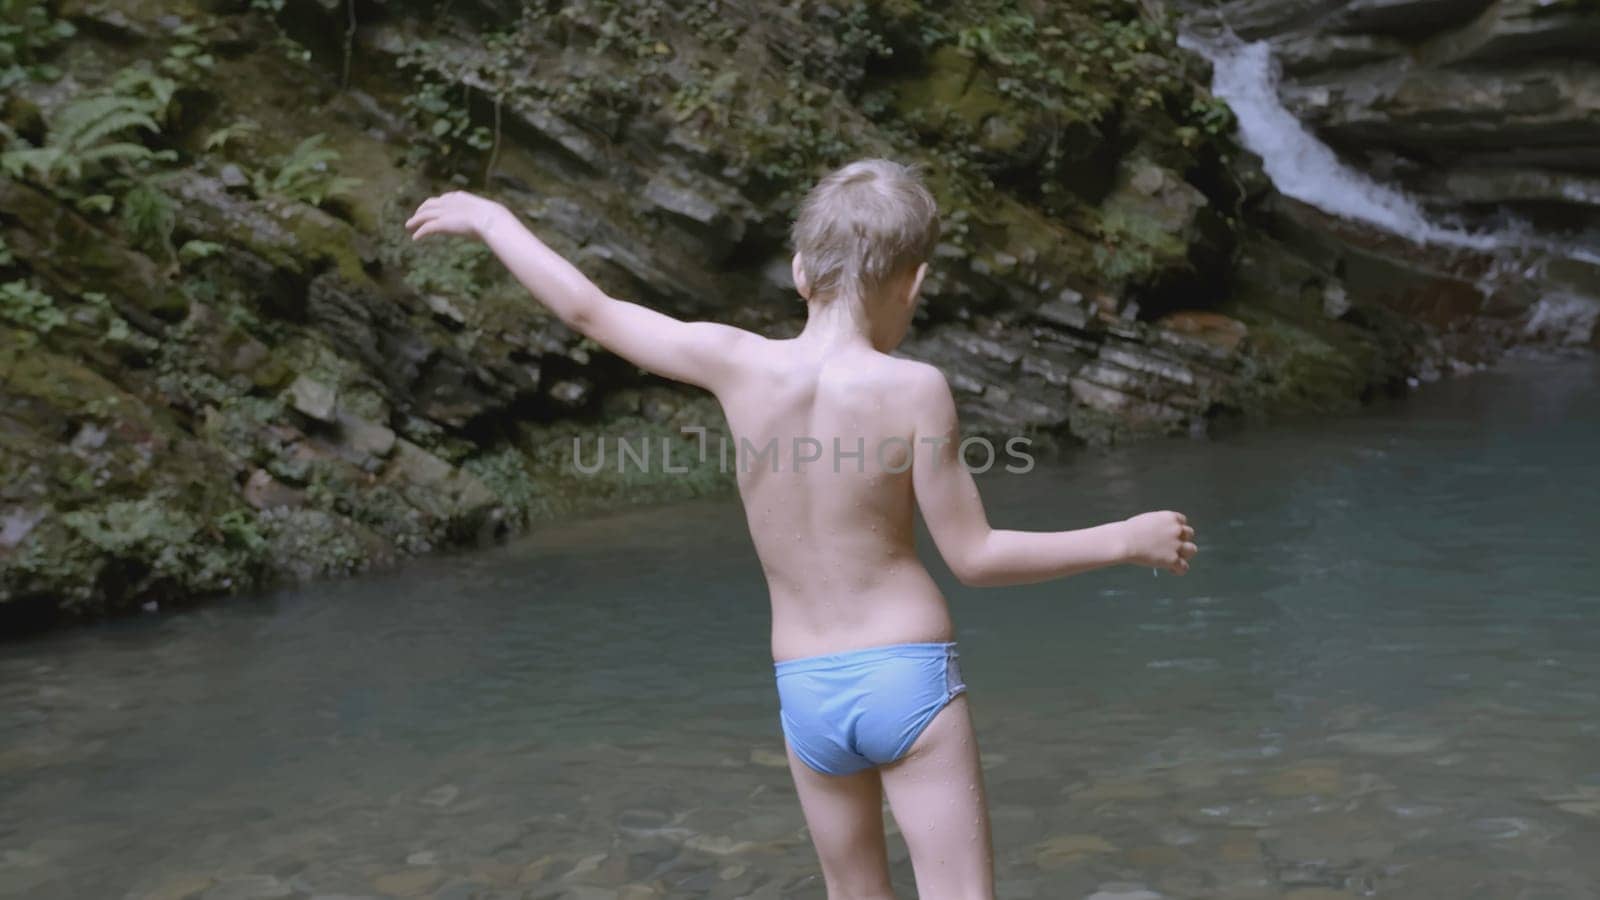 The boy enters the water near the waterfall to swim. CREATIVE. A white child in blue shorts enters the water. In the mountains there is a guy waist-deep in water.